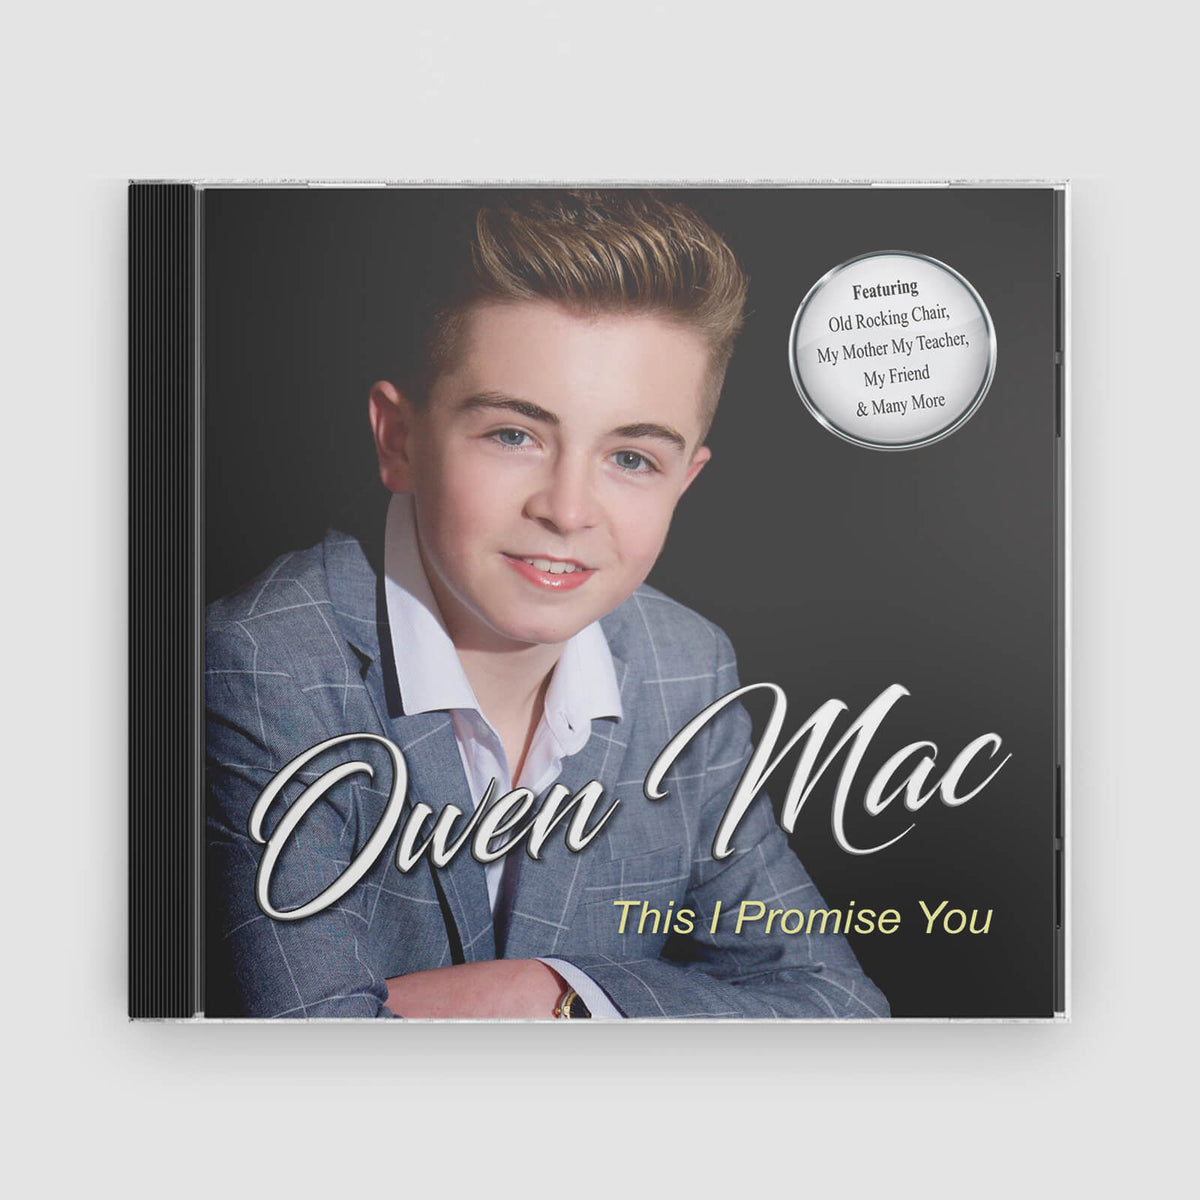 Owen Mac : This I Promise You